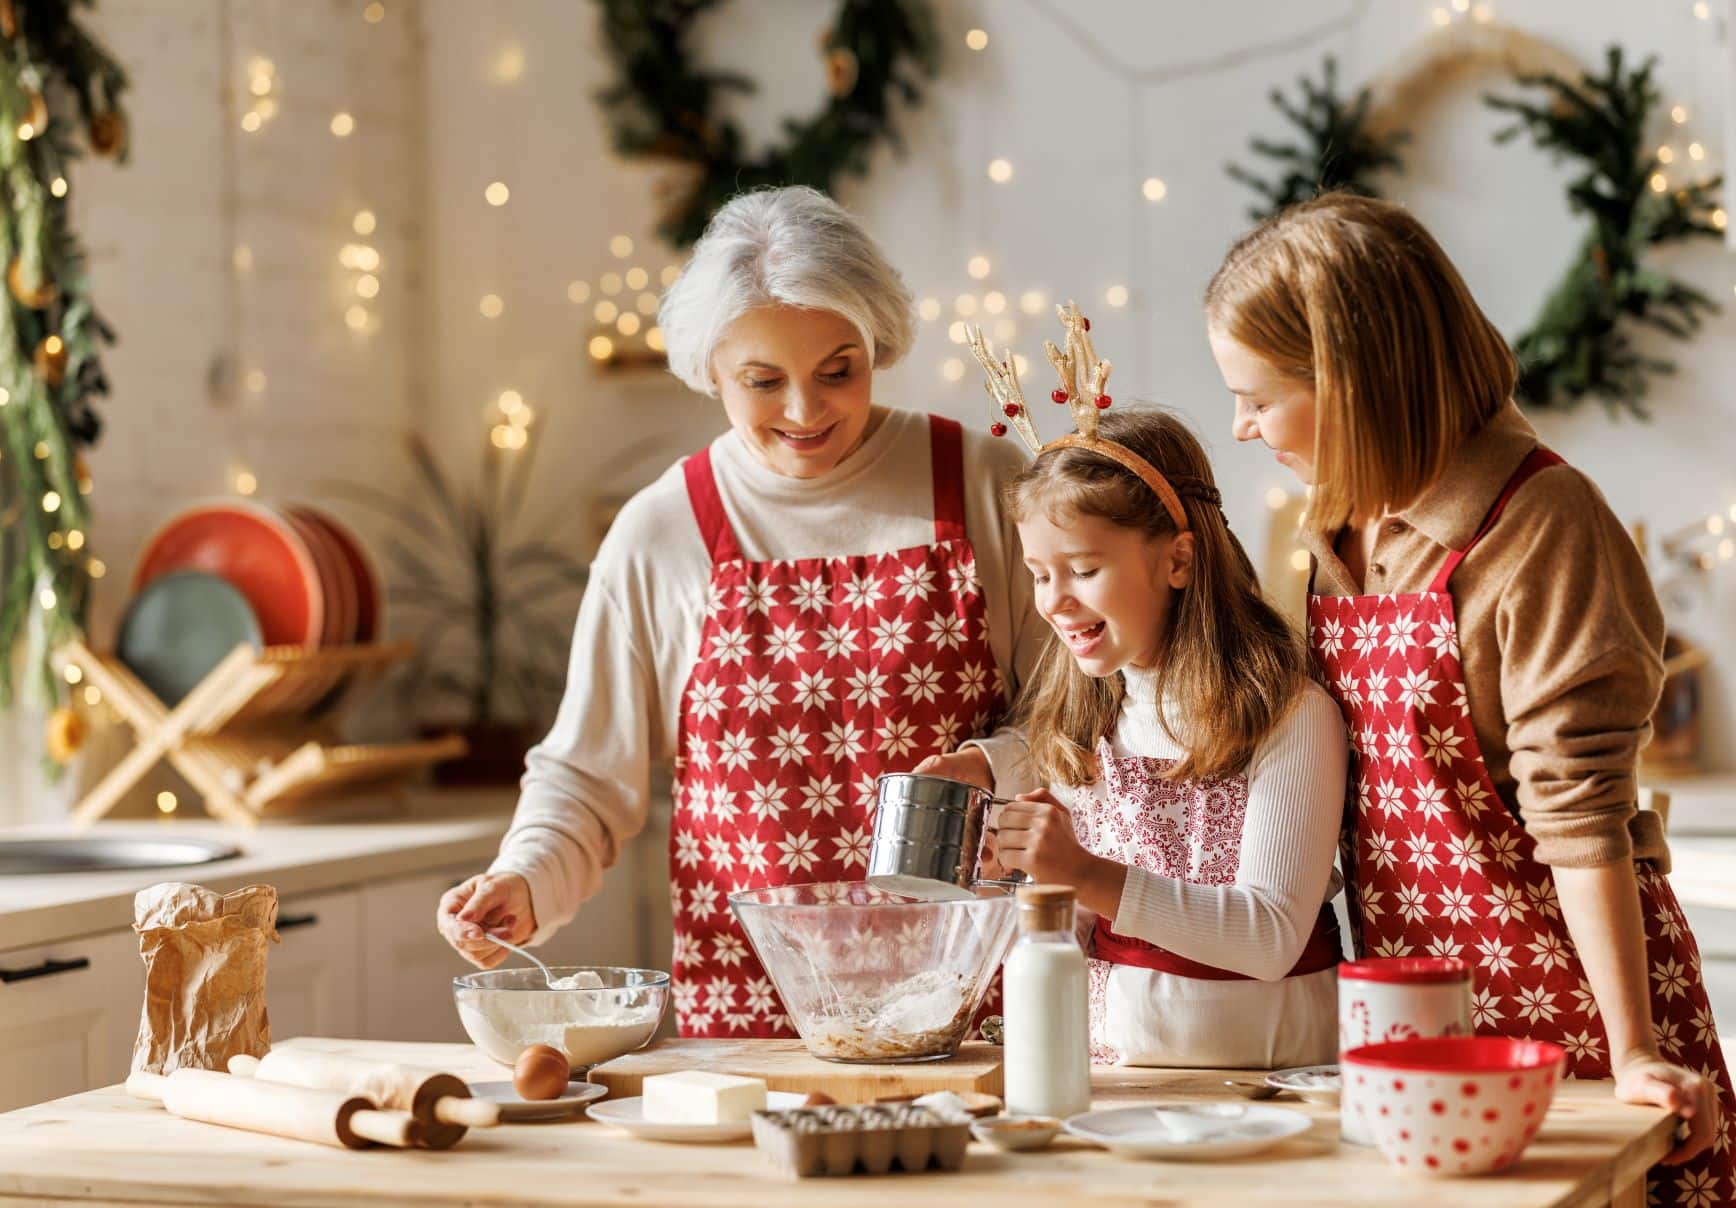 elderly woman, adult woman, and young girl baking cookies together